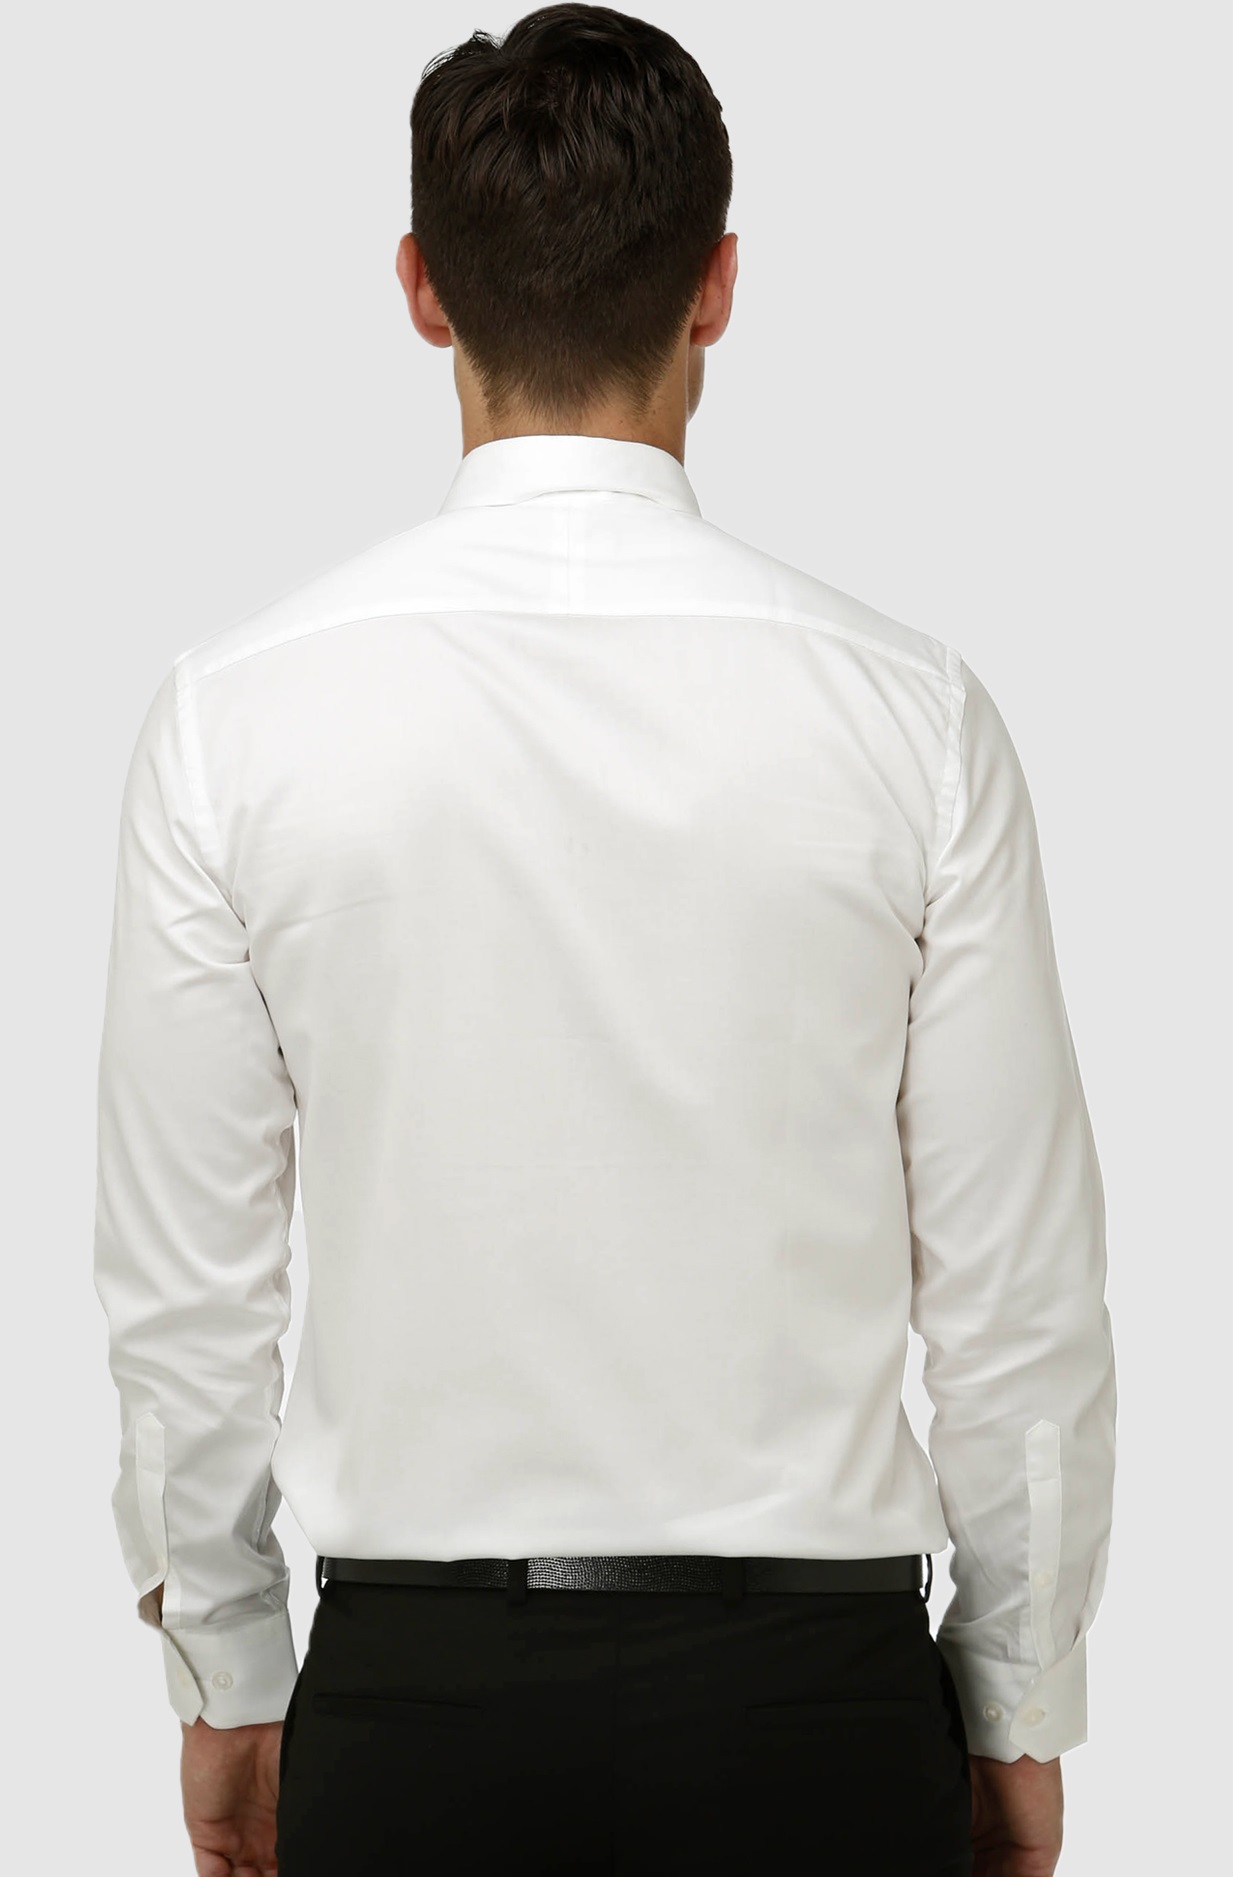 Brooksfield Shirts | Slim Fit Business Shirt | Save up to 25%